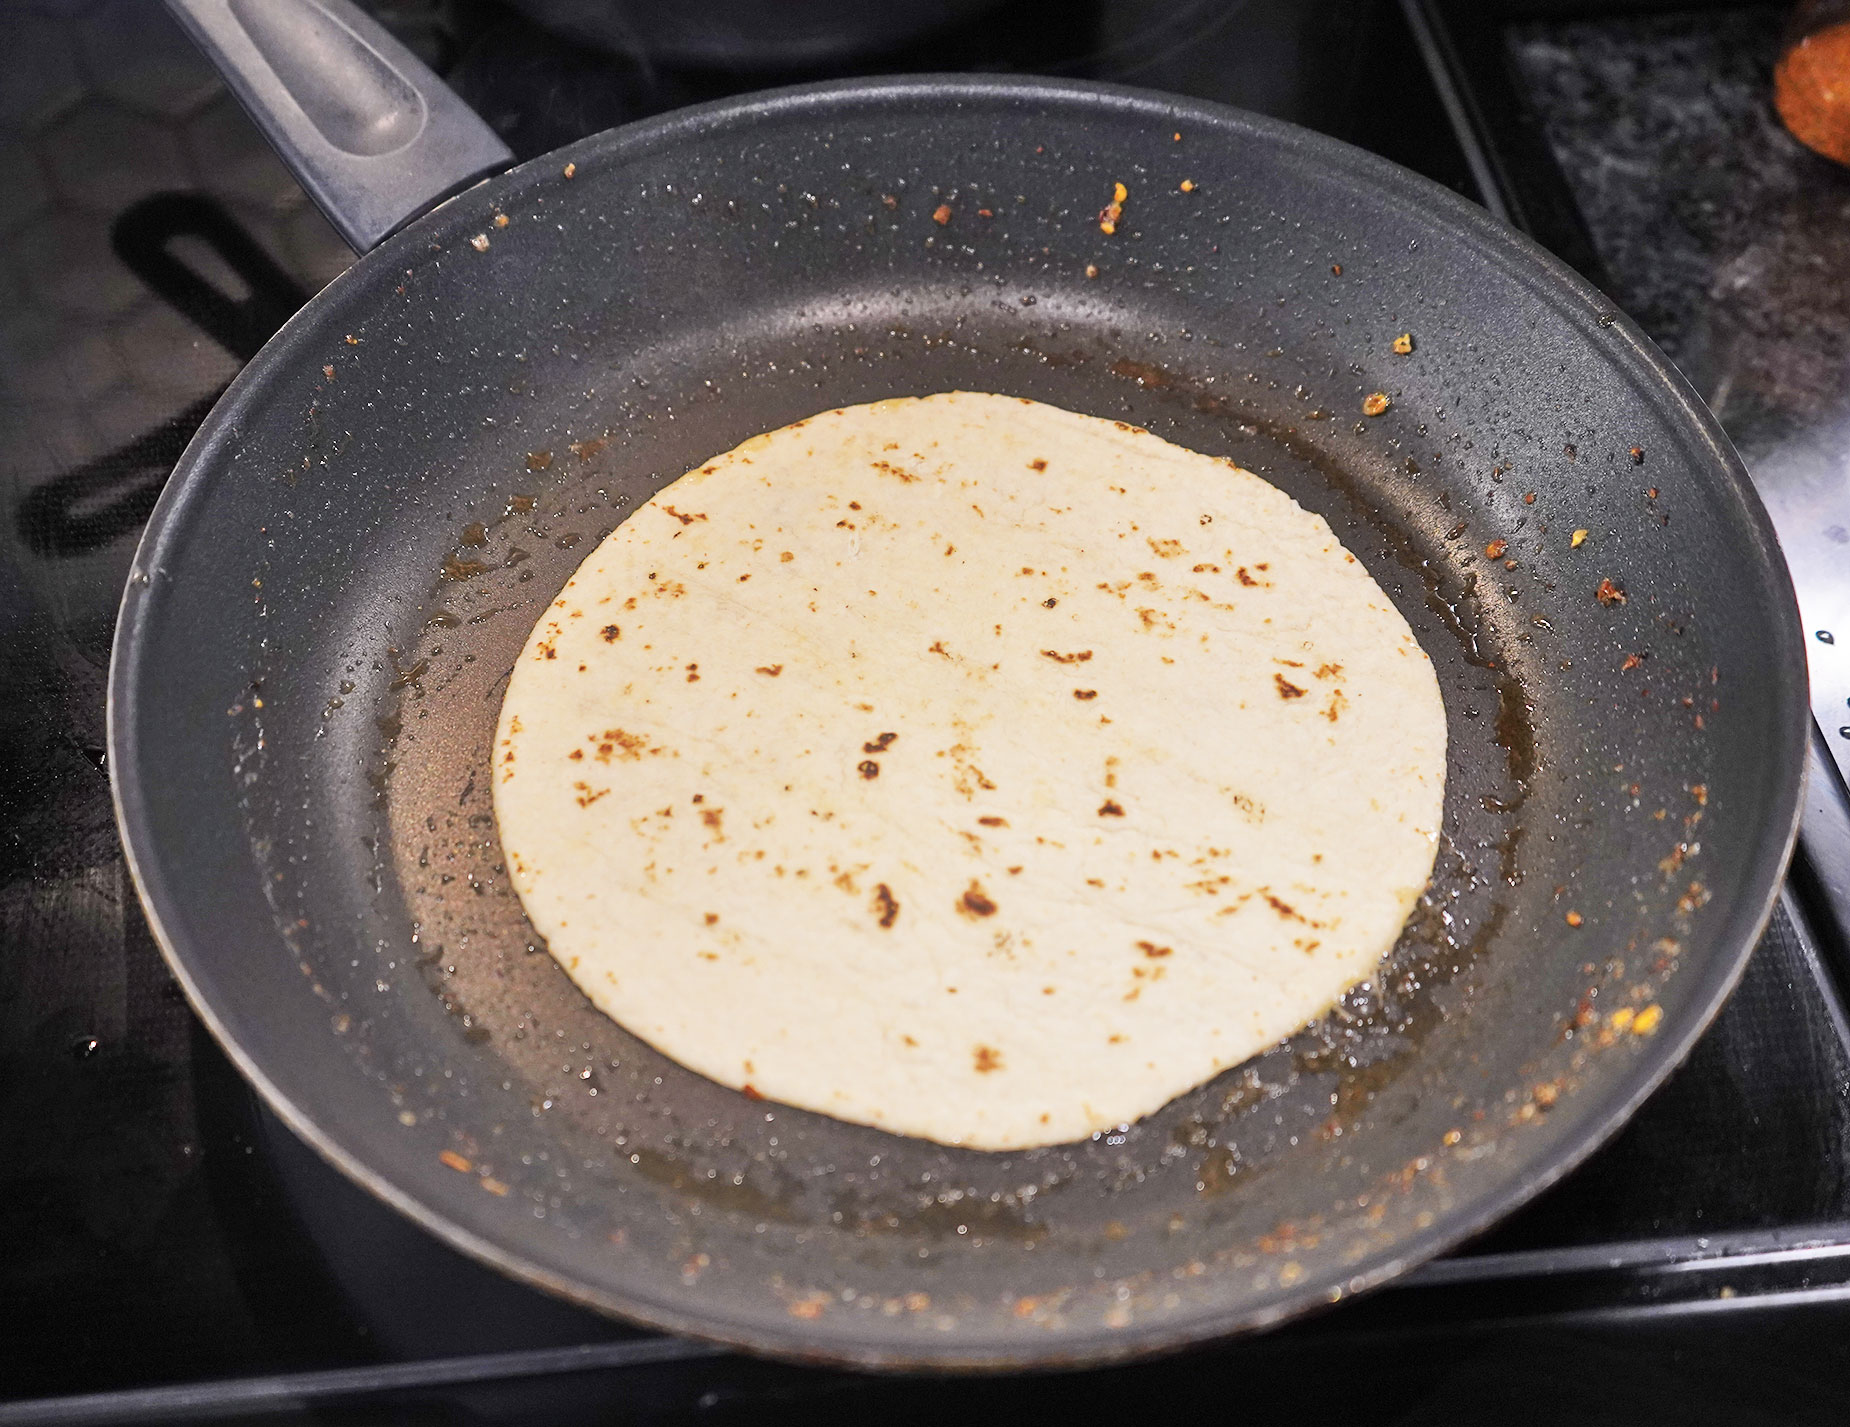 Frying the tortillas for tacos.